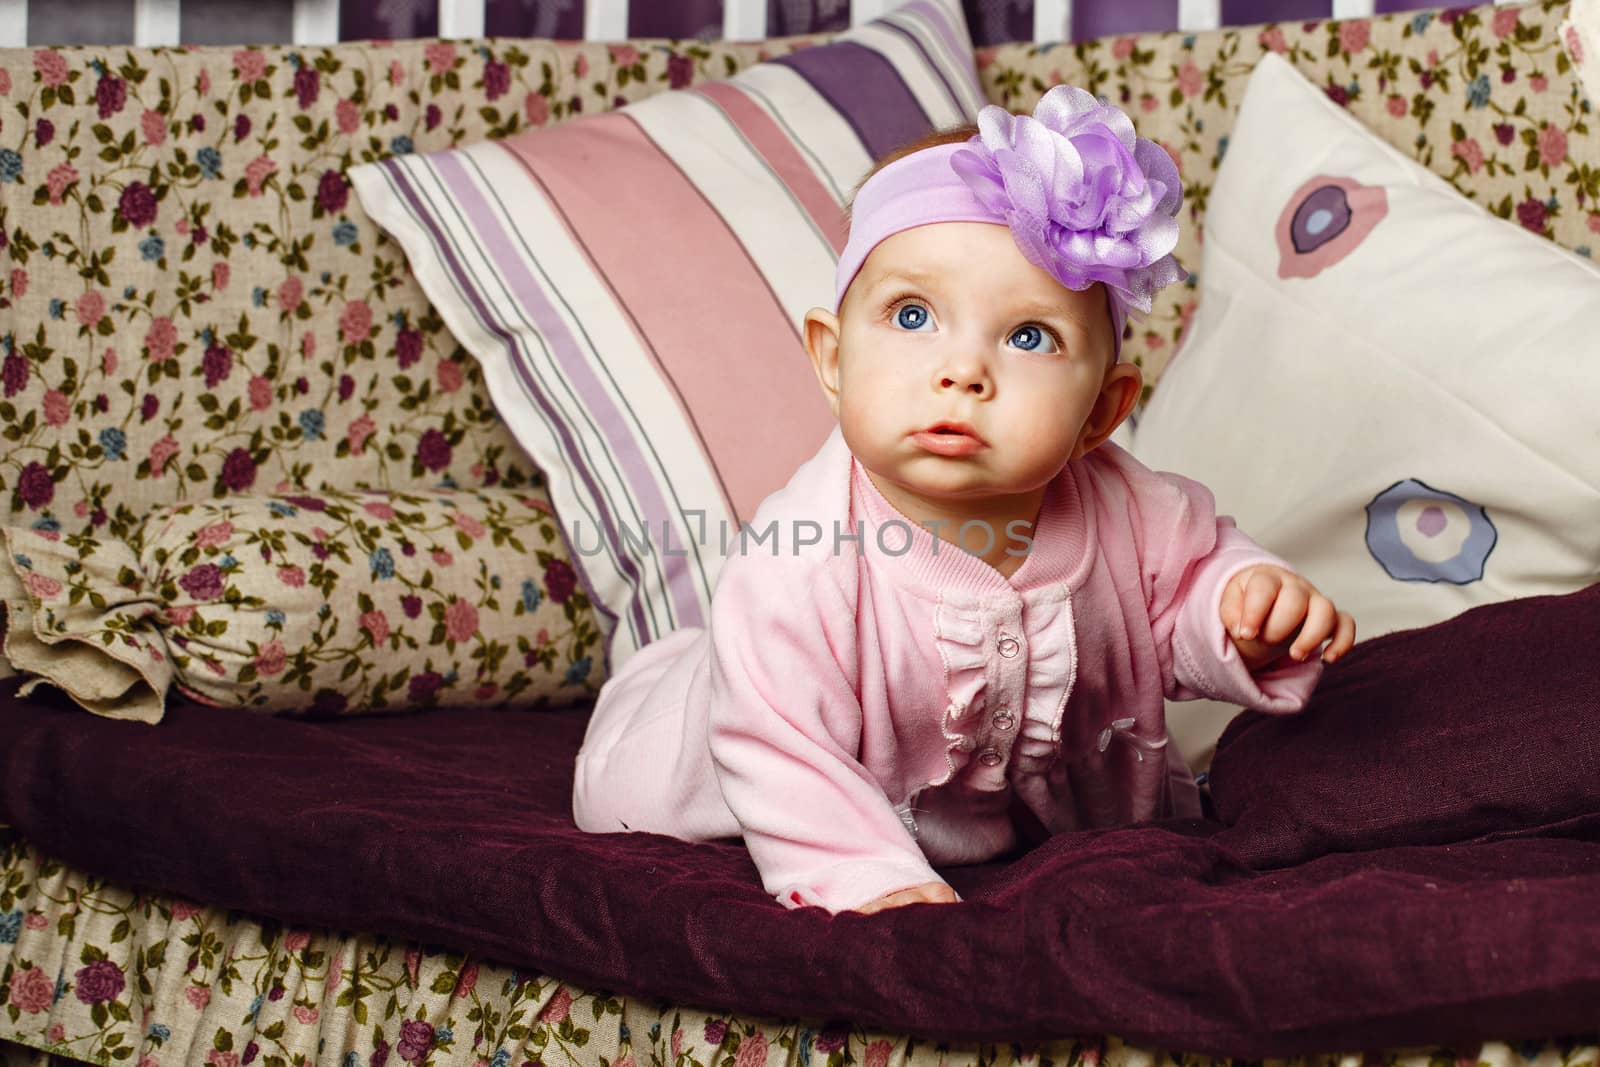 Little girl with bow on her head sitting on couch